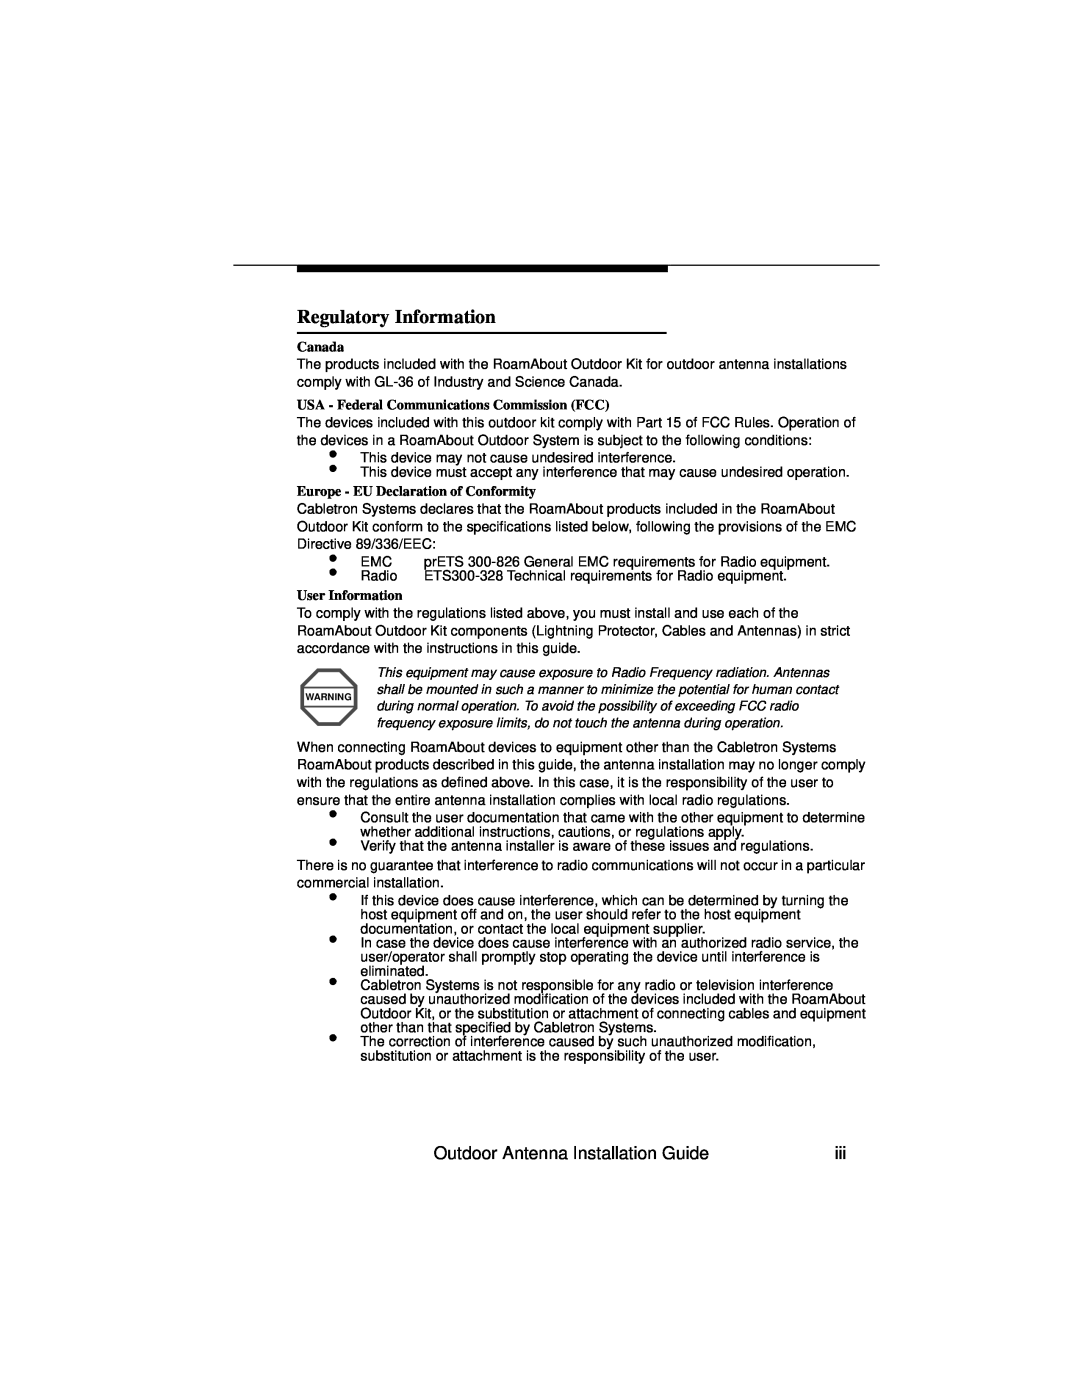 Cabletron Systems 9033073 Regulatory Information, Canada, USA - Federal Communications Commission FCC, User Information 